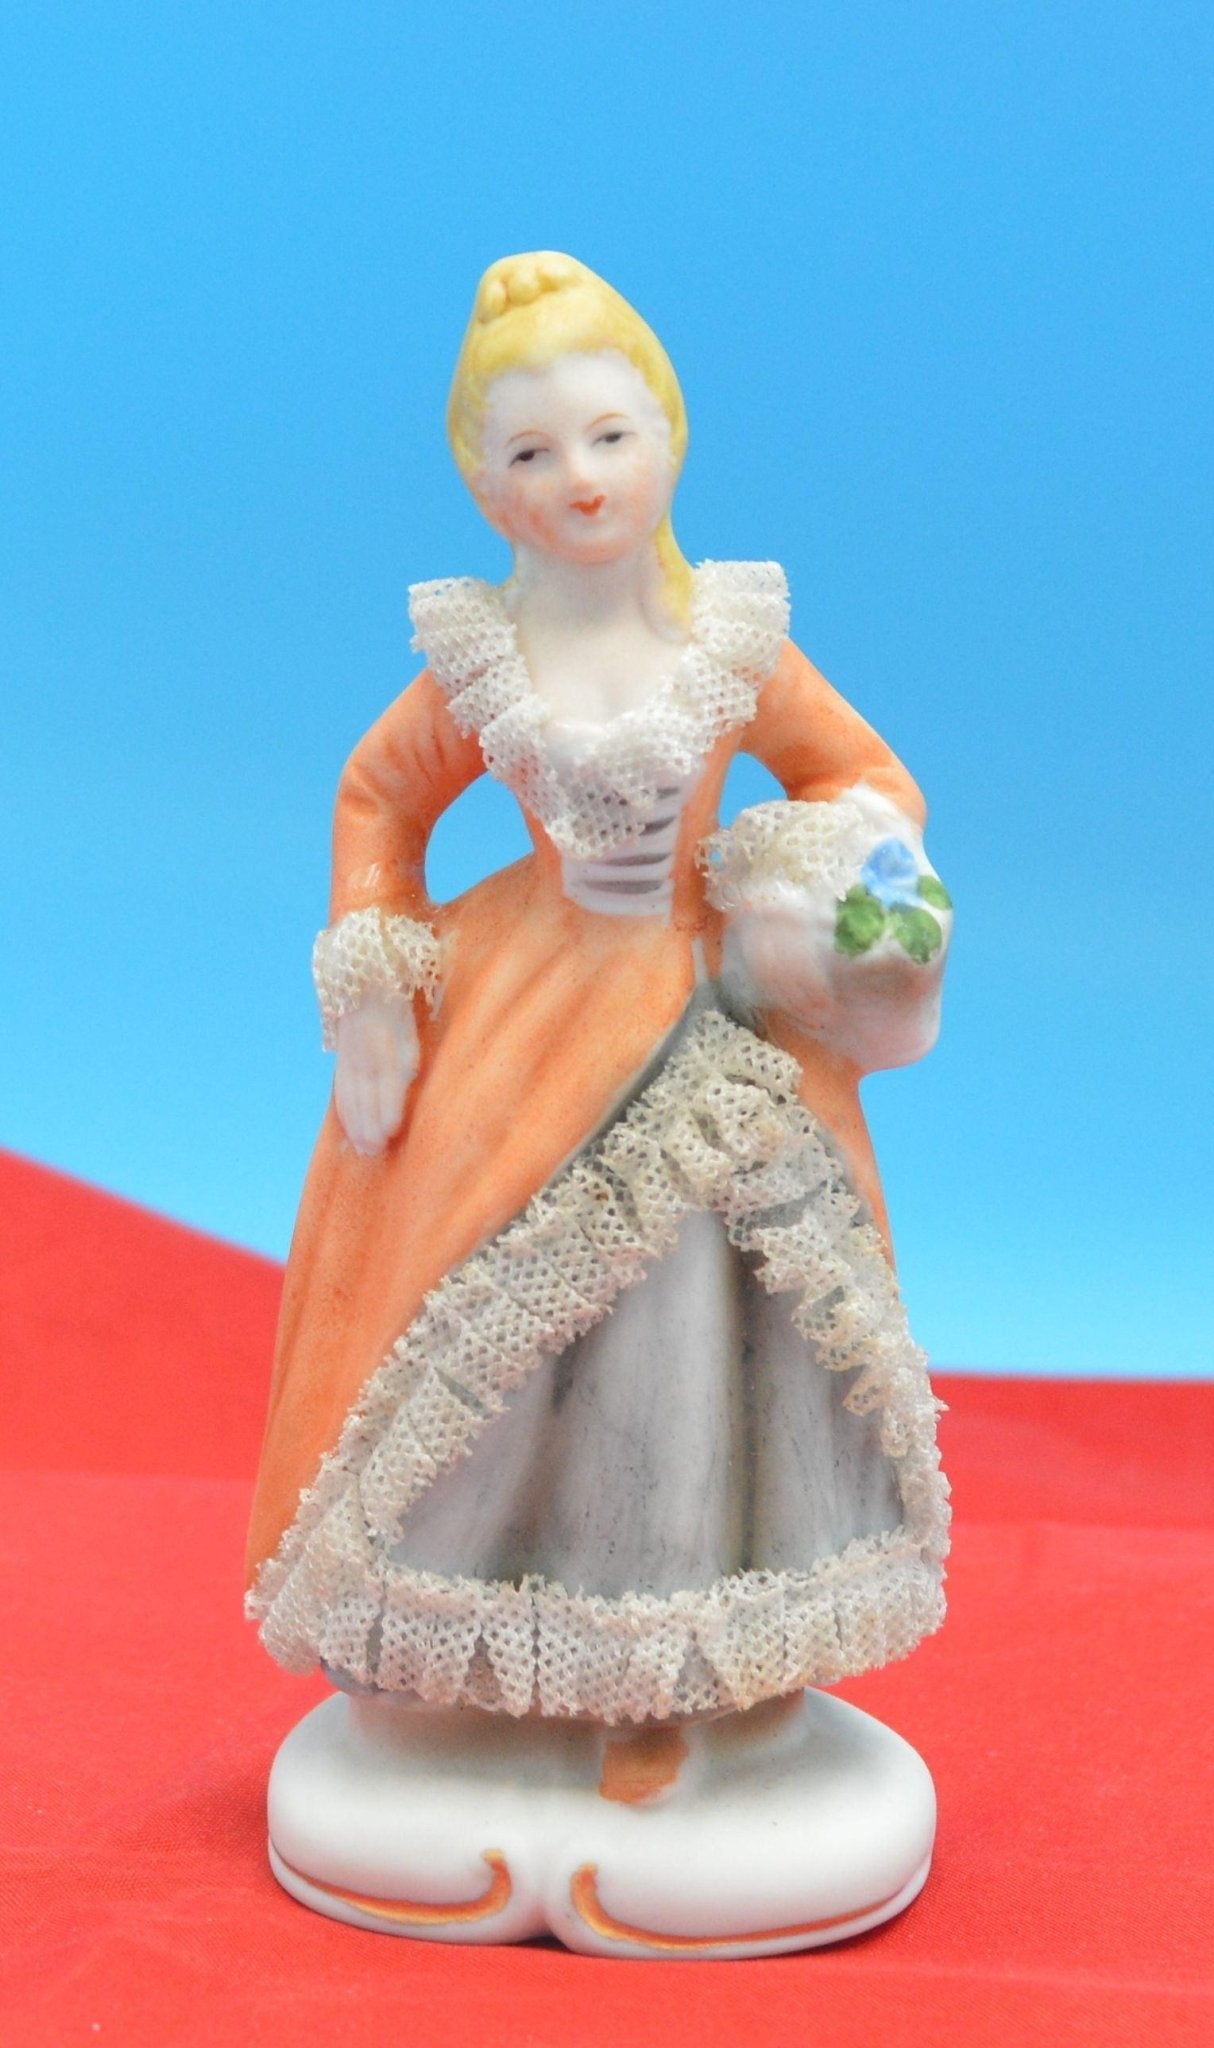 DECORATIVE FIGURINES A PAIR OF PERIOD STYLE FIGURINES - TMD167207